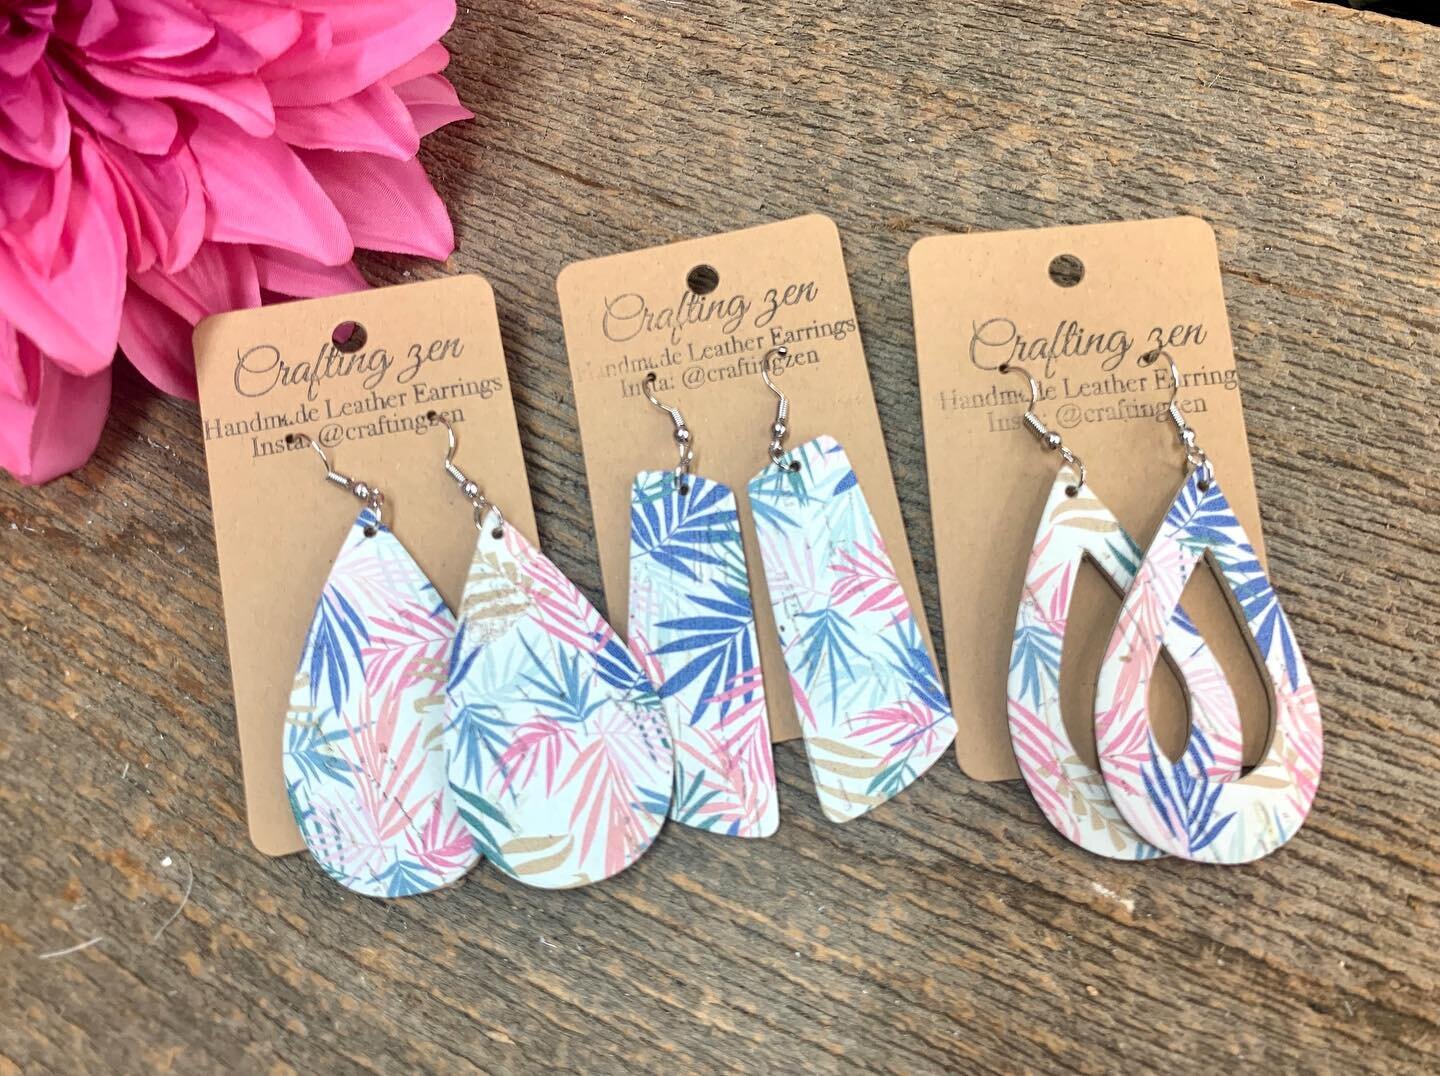 Tropical fronds on cork. Summery, festive and fun! These make me want to have a summer outdoor party.

www.craftingzenleather.com

#craftingzenleather #earrings #armstrongjewelrystudio #leatherjewelry #leatherbracelet #shoplocal #leatherearrings #han